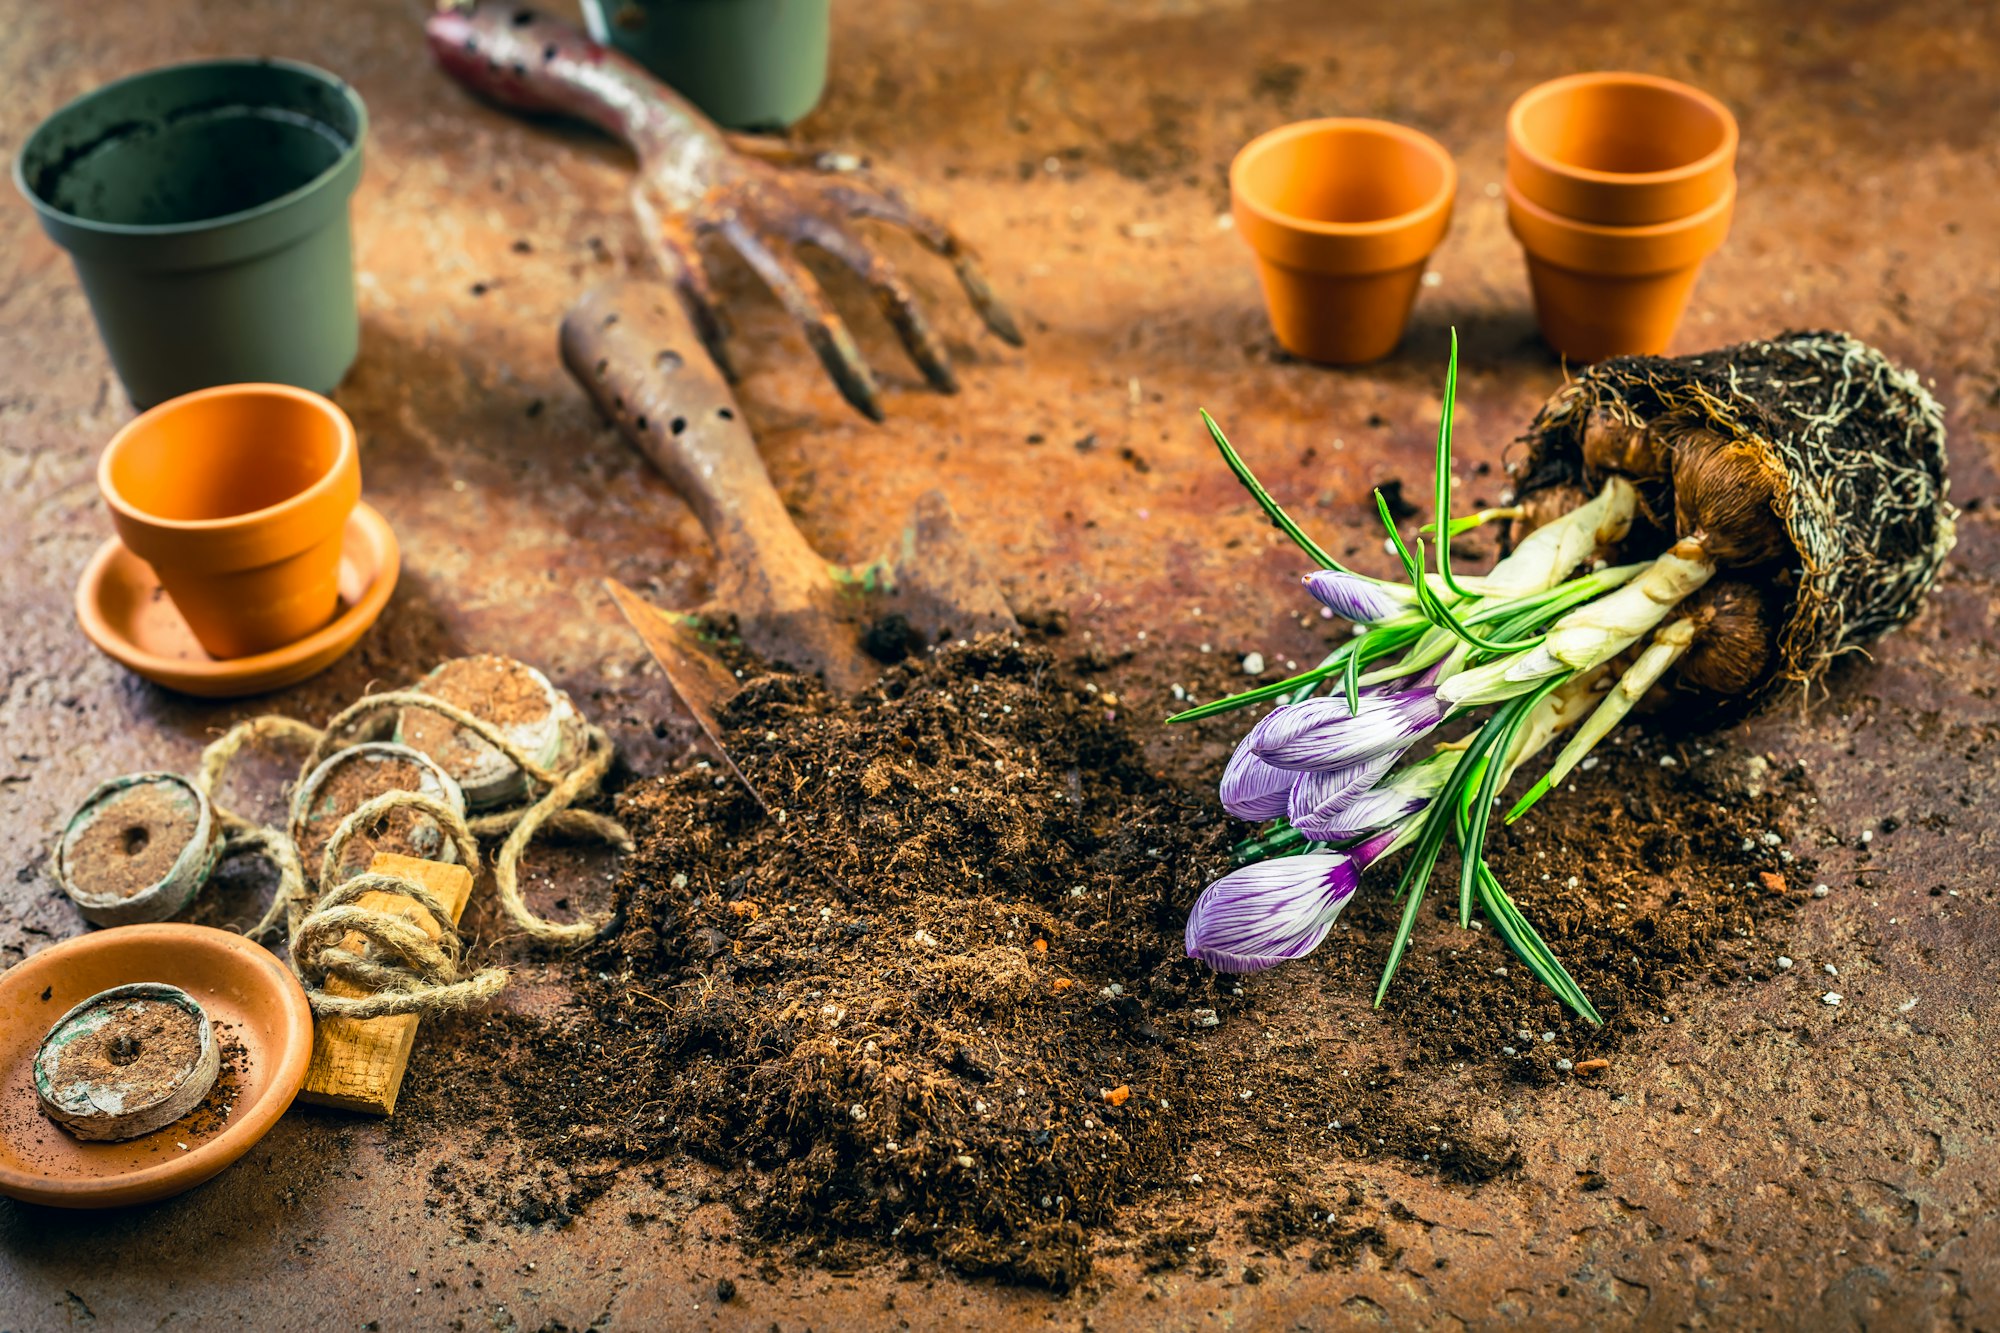 Spring gardening concept - gardening tools with plants, flowerpots and soil